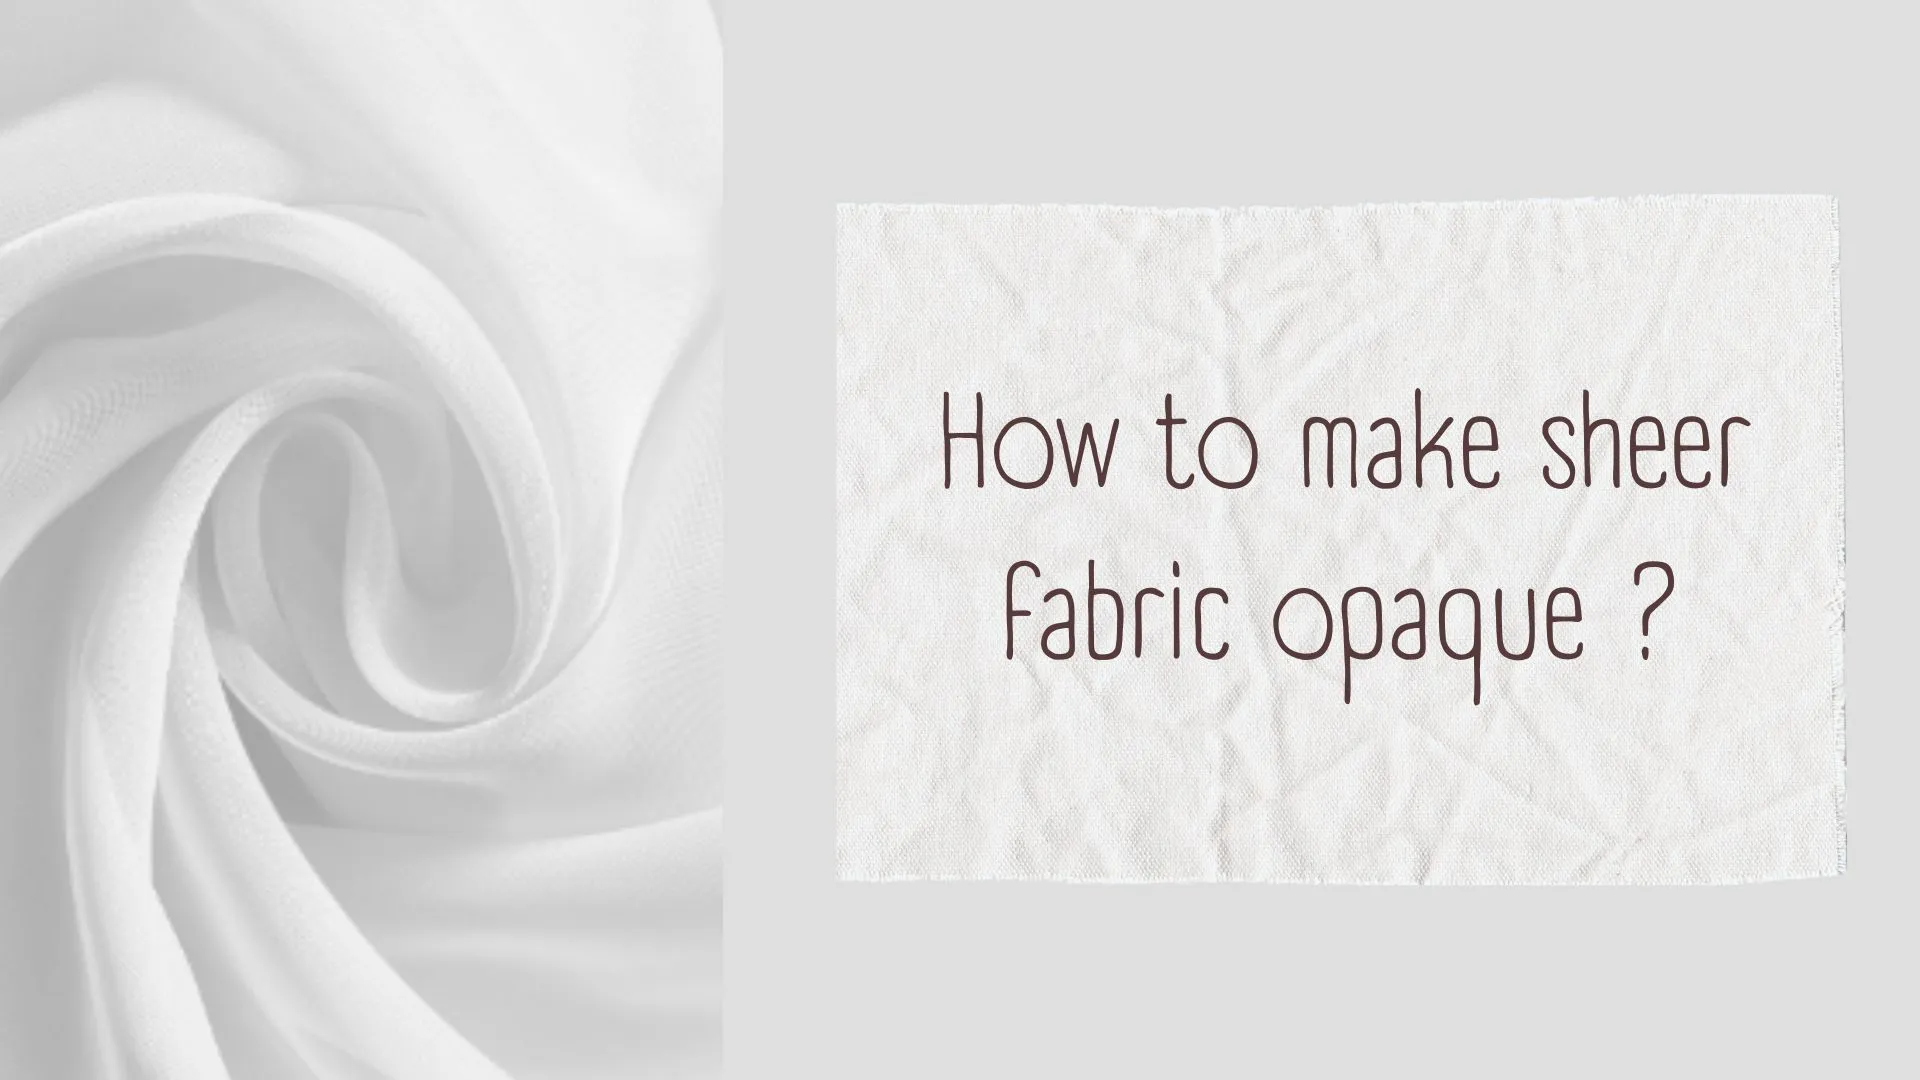 Using Sheer, Netting, and other Semi-Transparent Fabrics